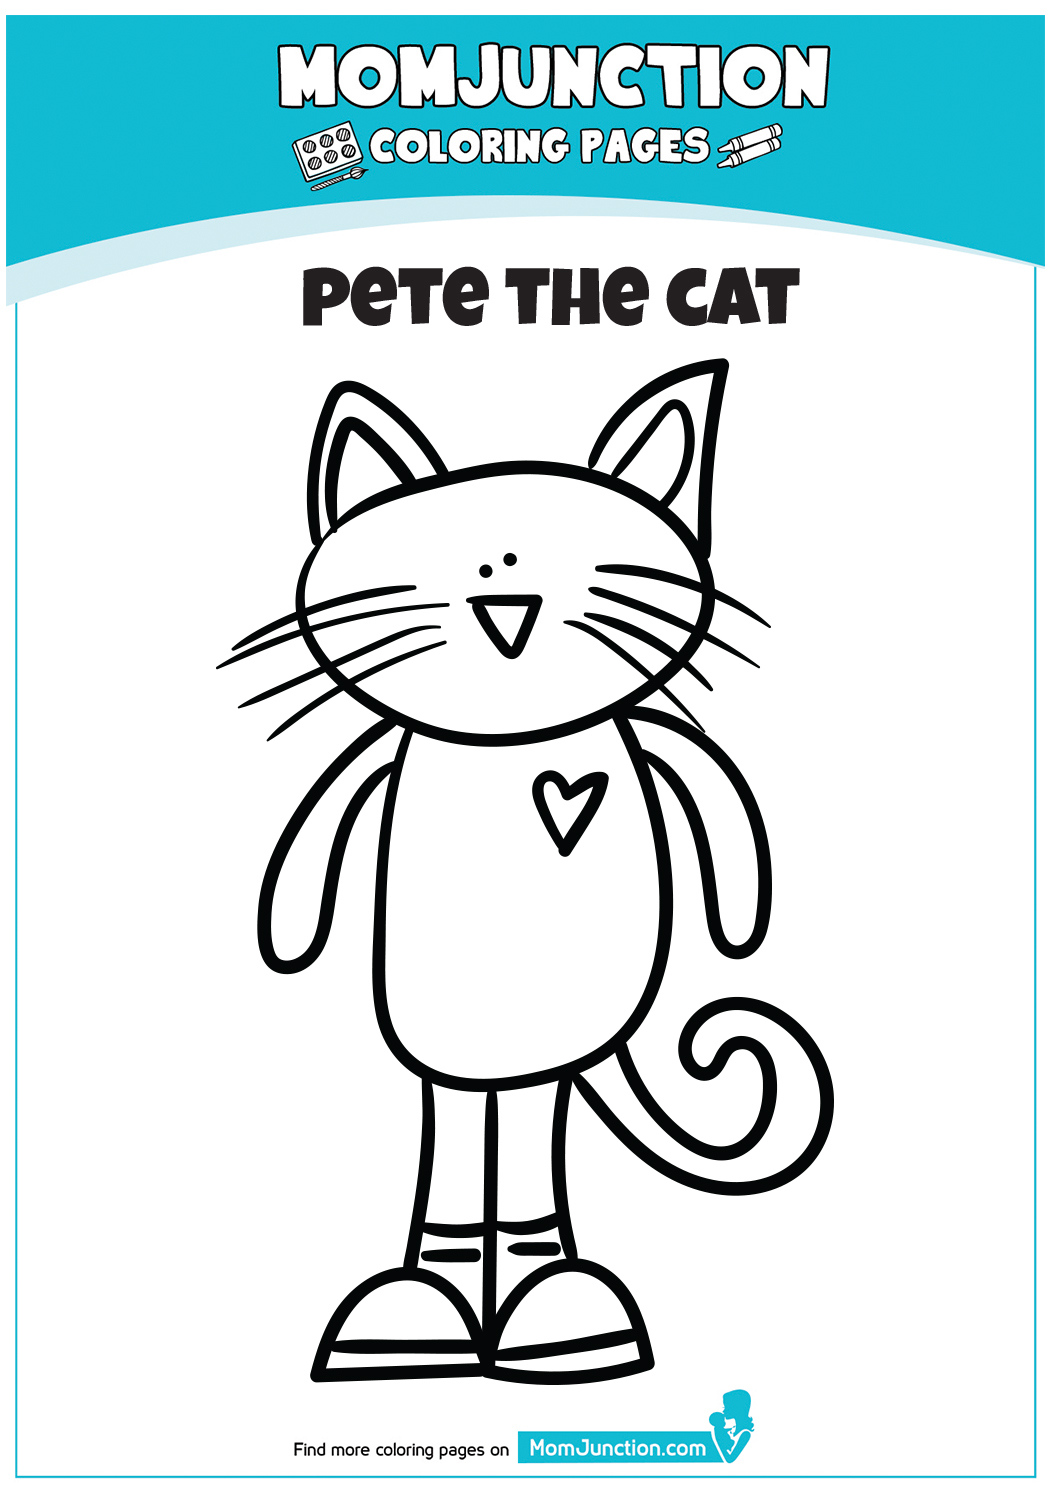 A-Pete-The-Cat-Coloring-Pages-lo